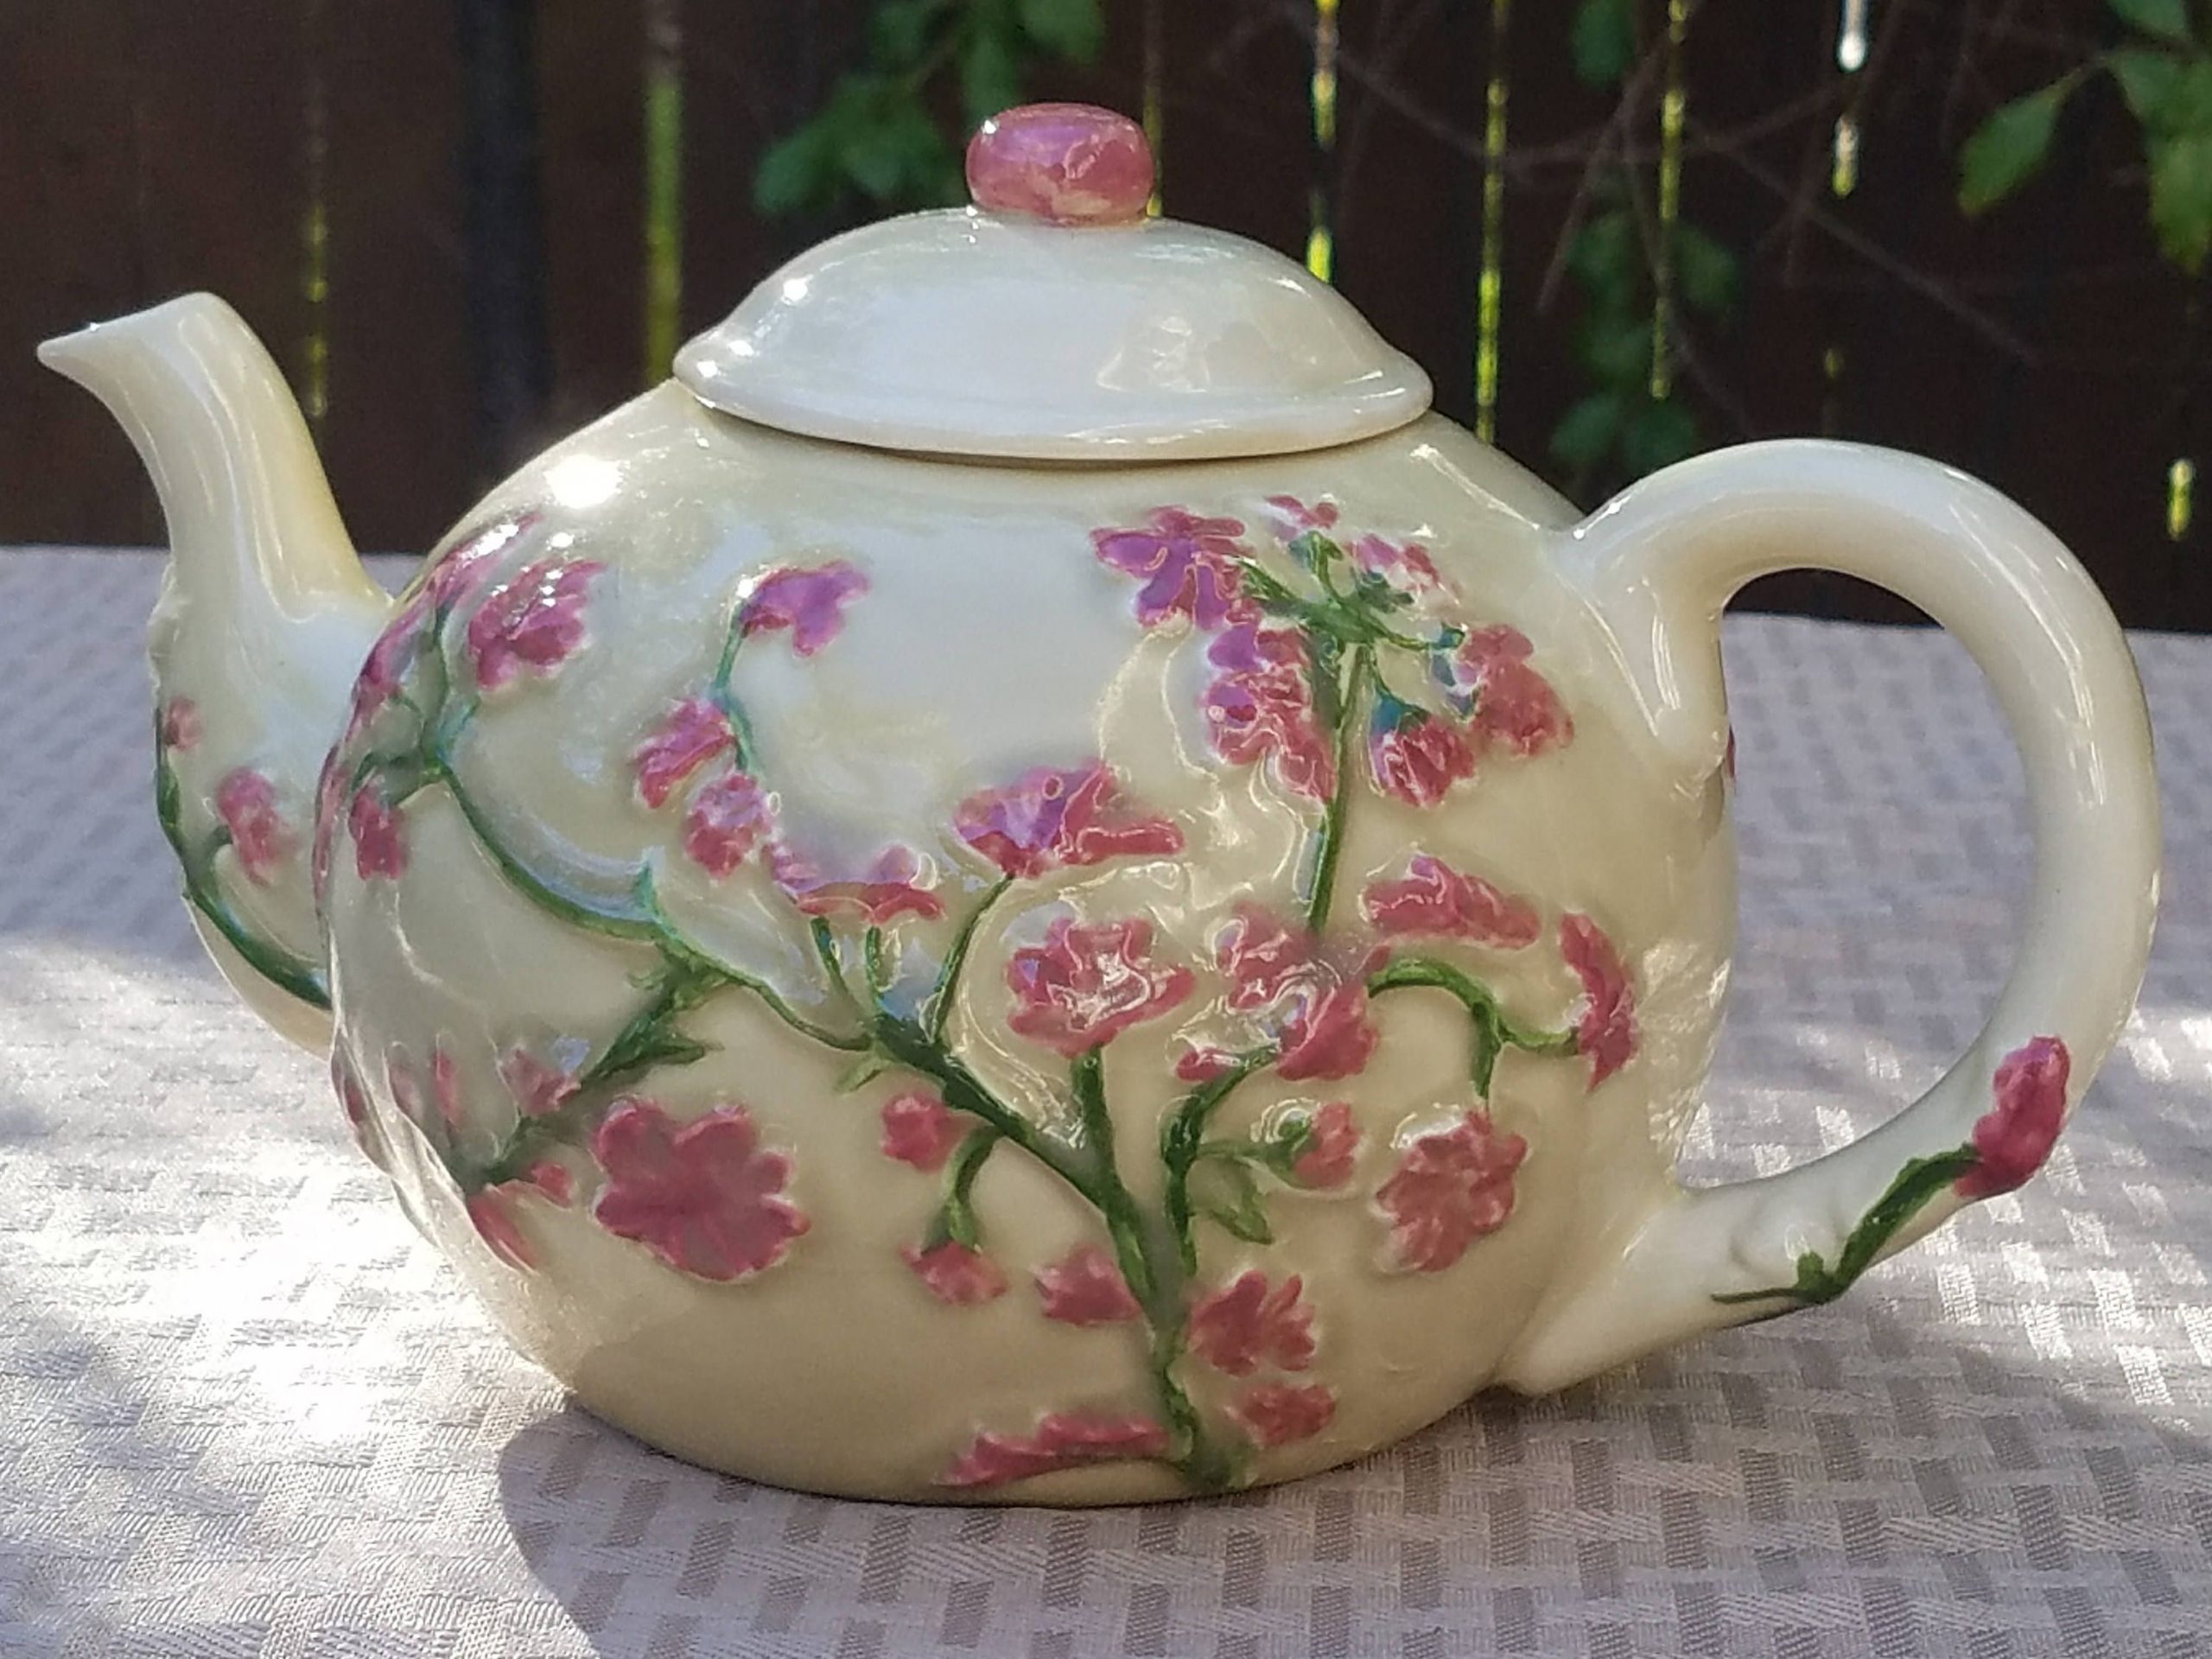 How To Make The Selection Of The Best Teapot?